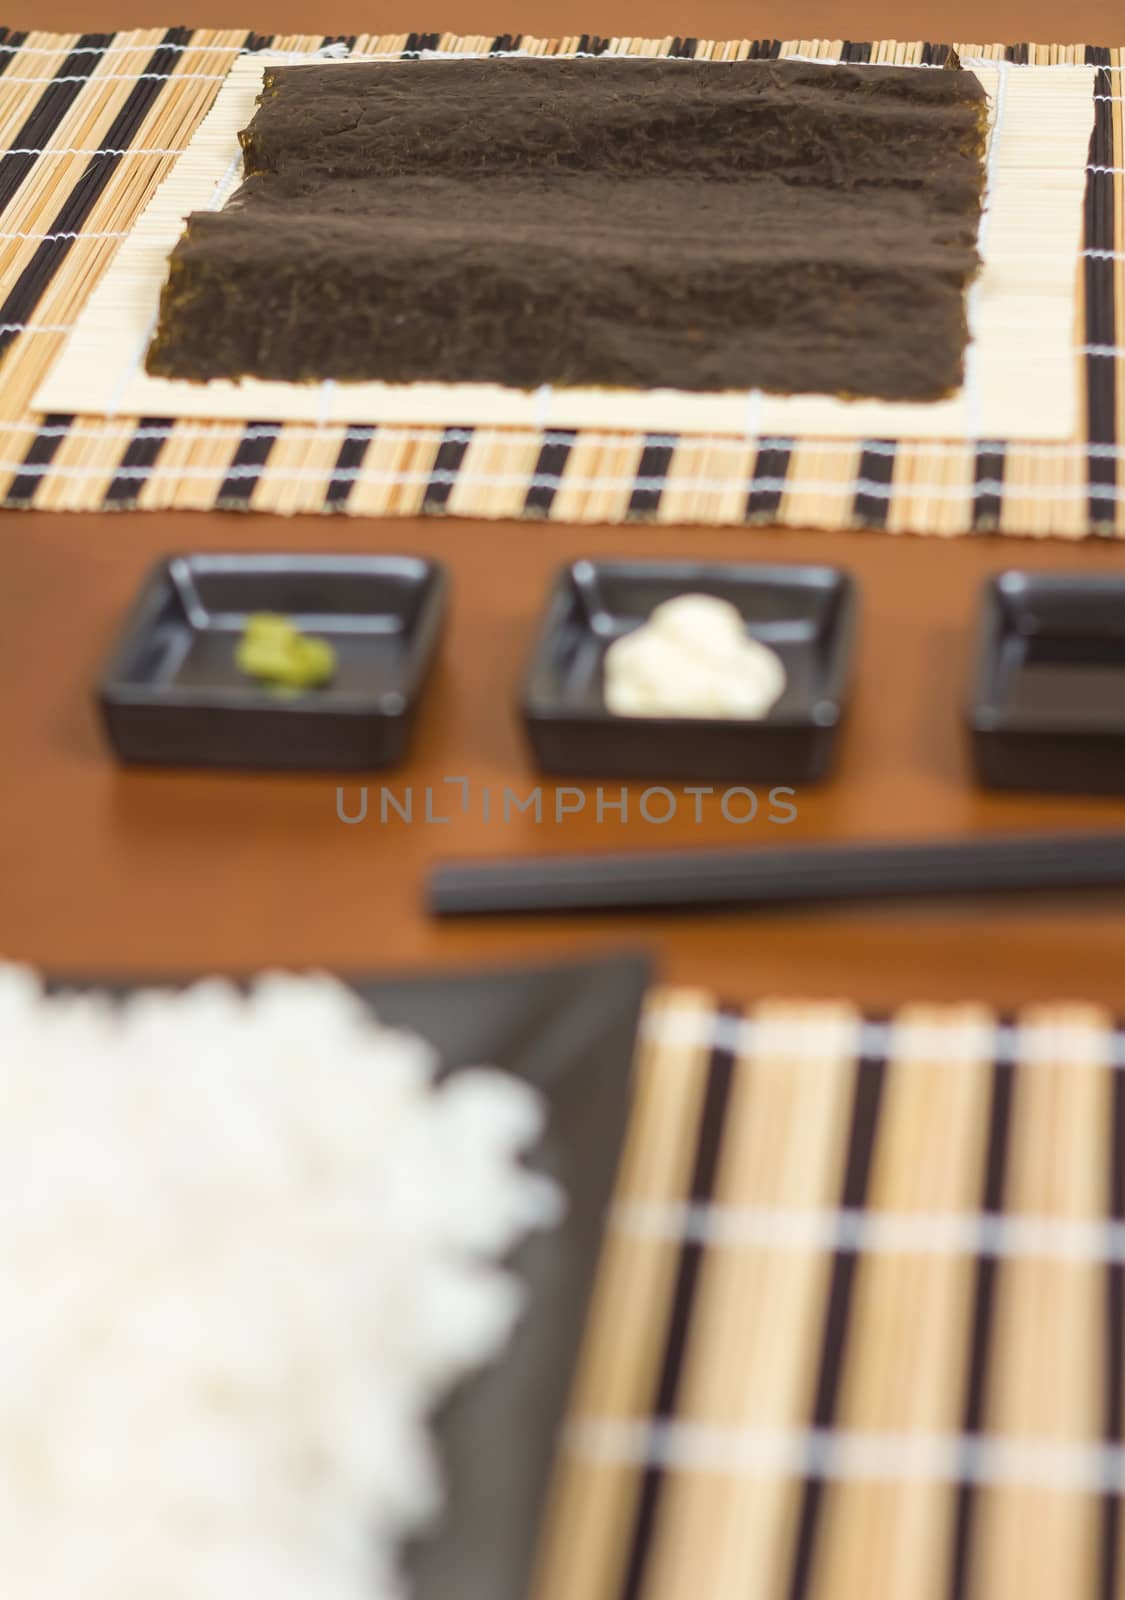 Nori seaweed sheet ready to make japanese sushi rolls, with sauces and rice in the foreground. Selective focus in nori seaweed.